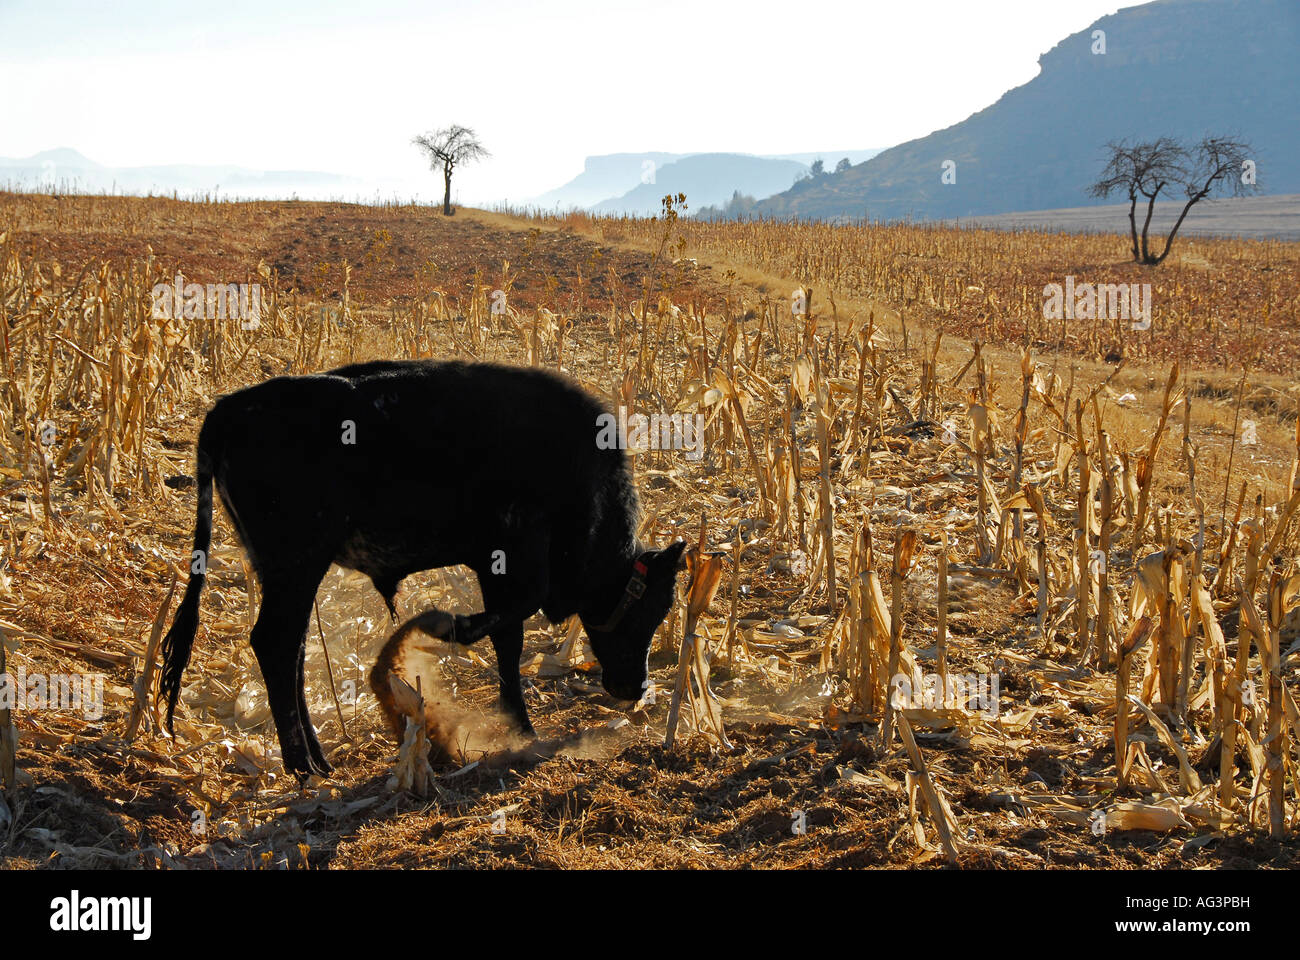 Young bullock pawing earth in dry corn patch, Lesotho, Africa Stock Photo